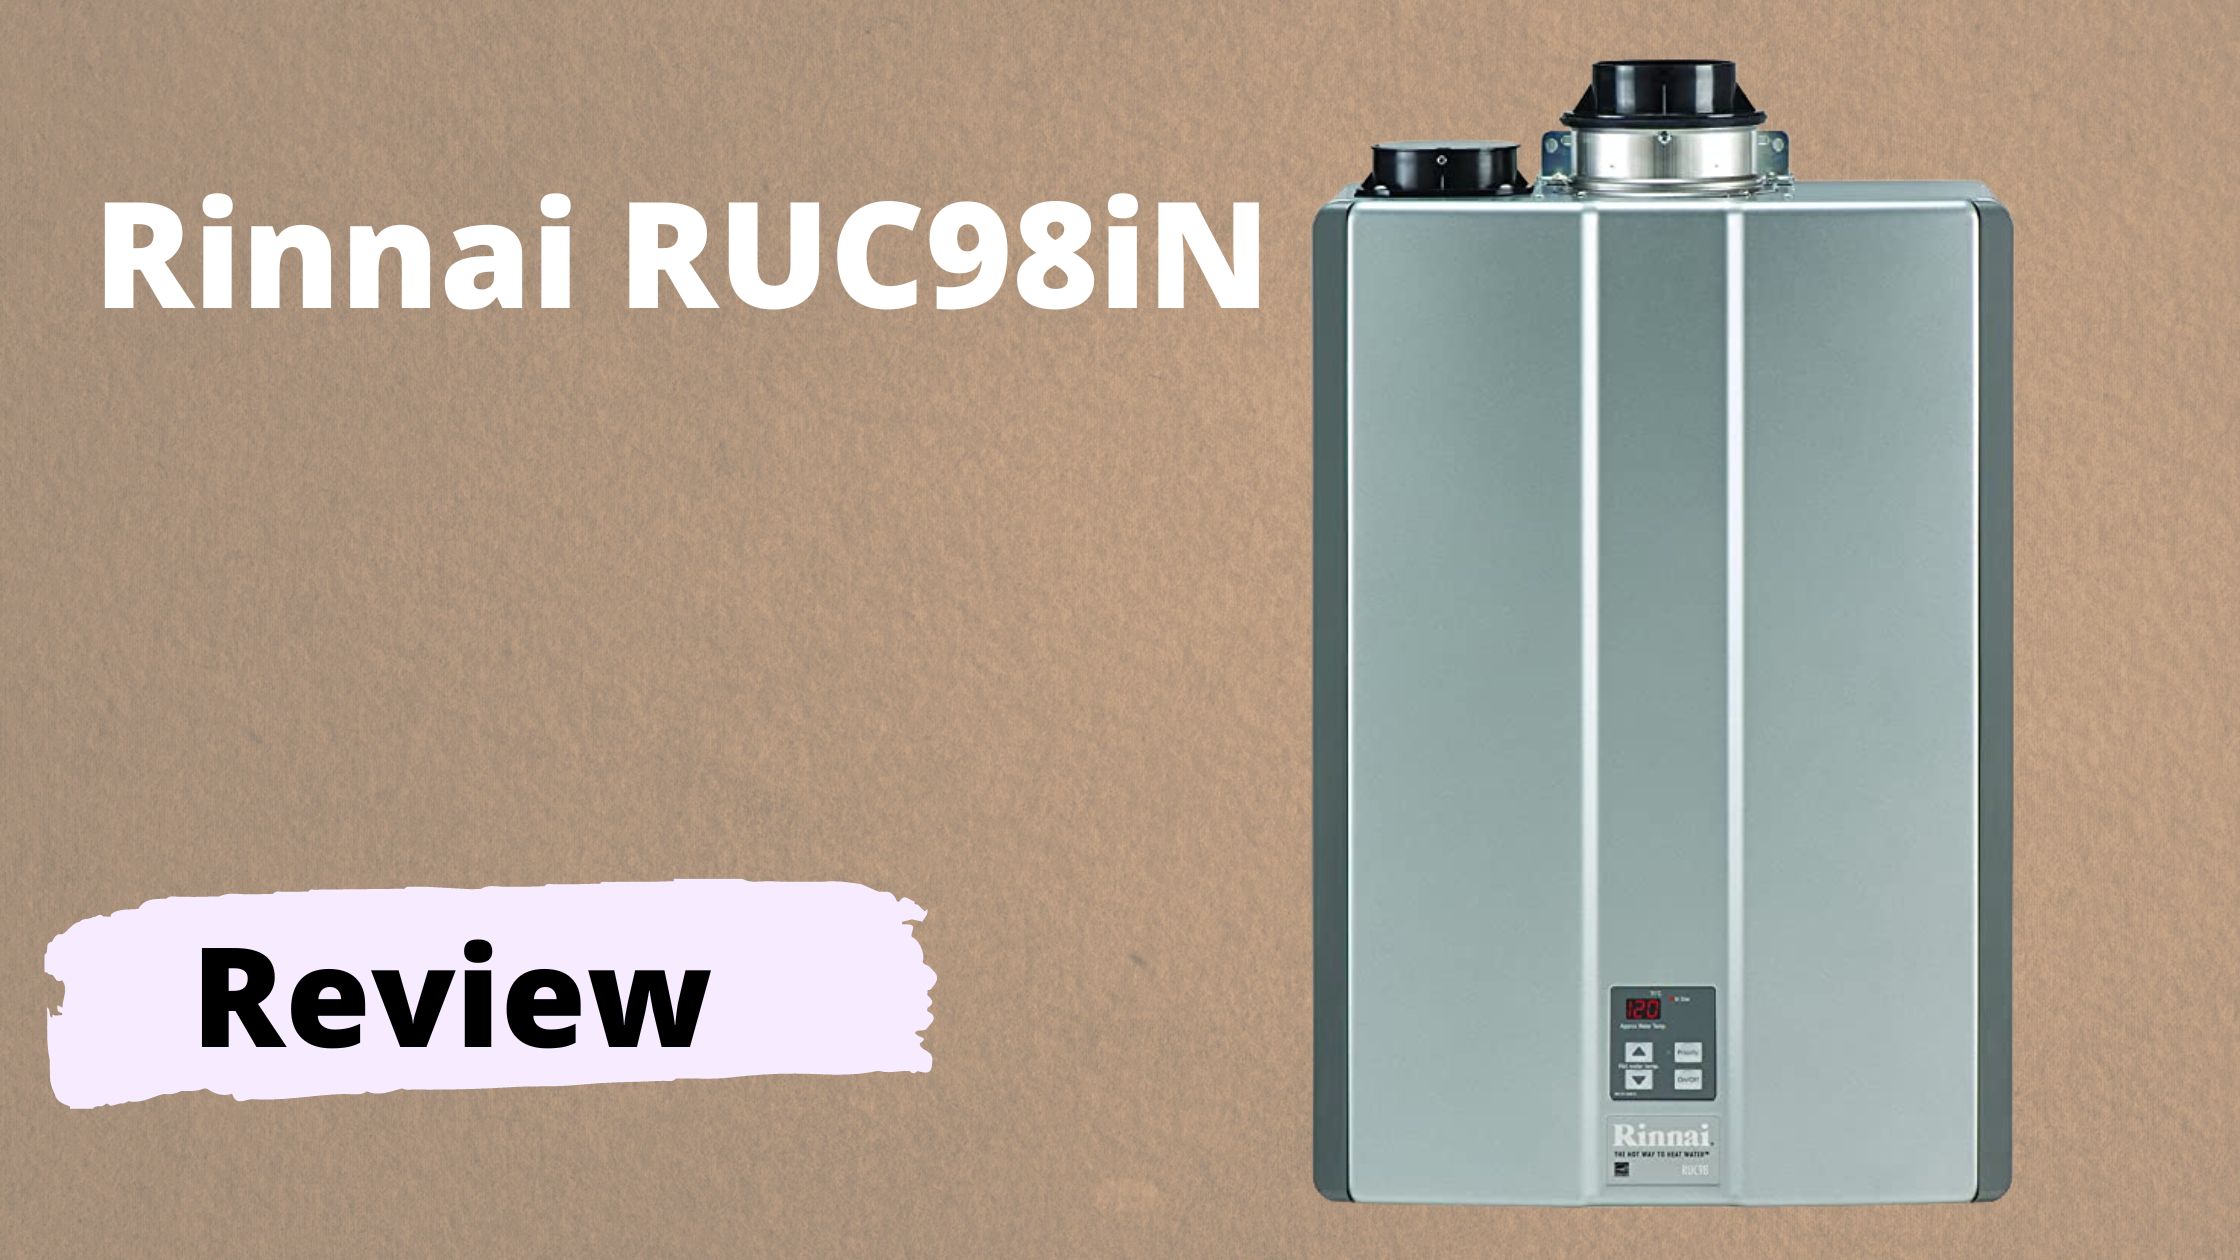 Rinnai RUC98iN Review